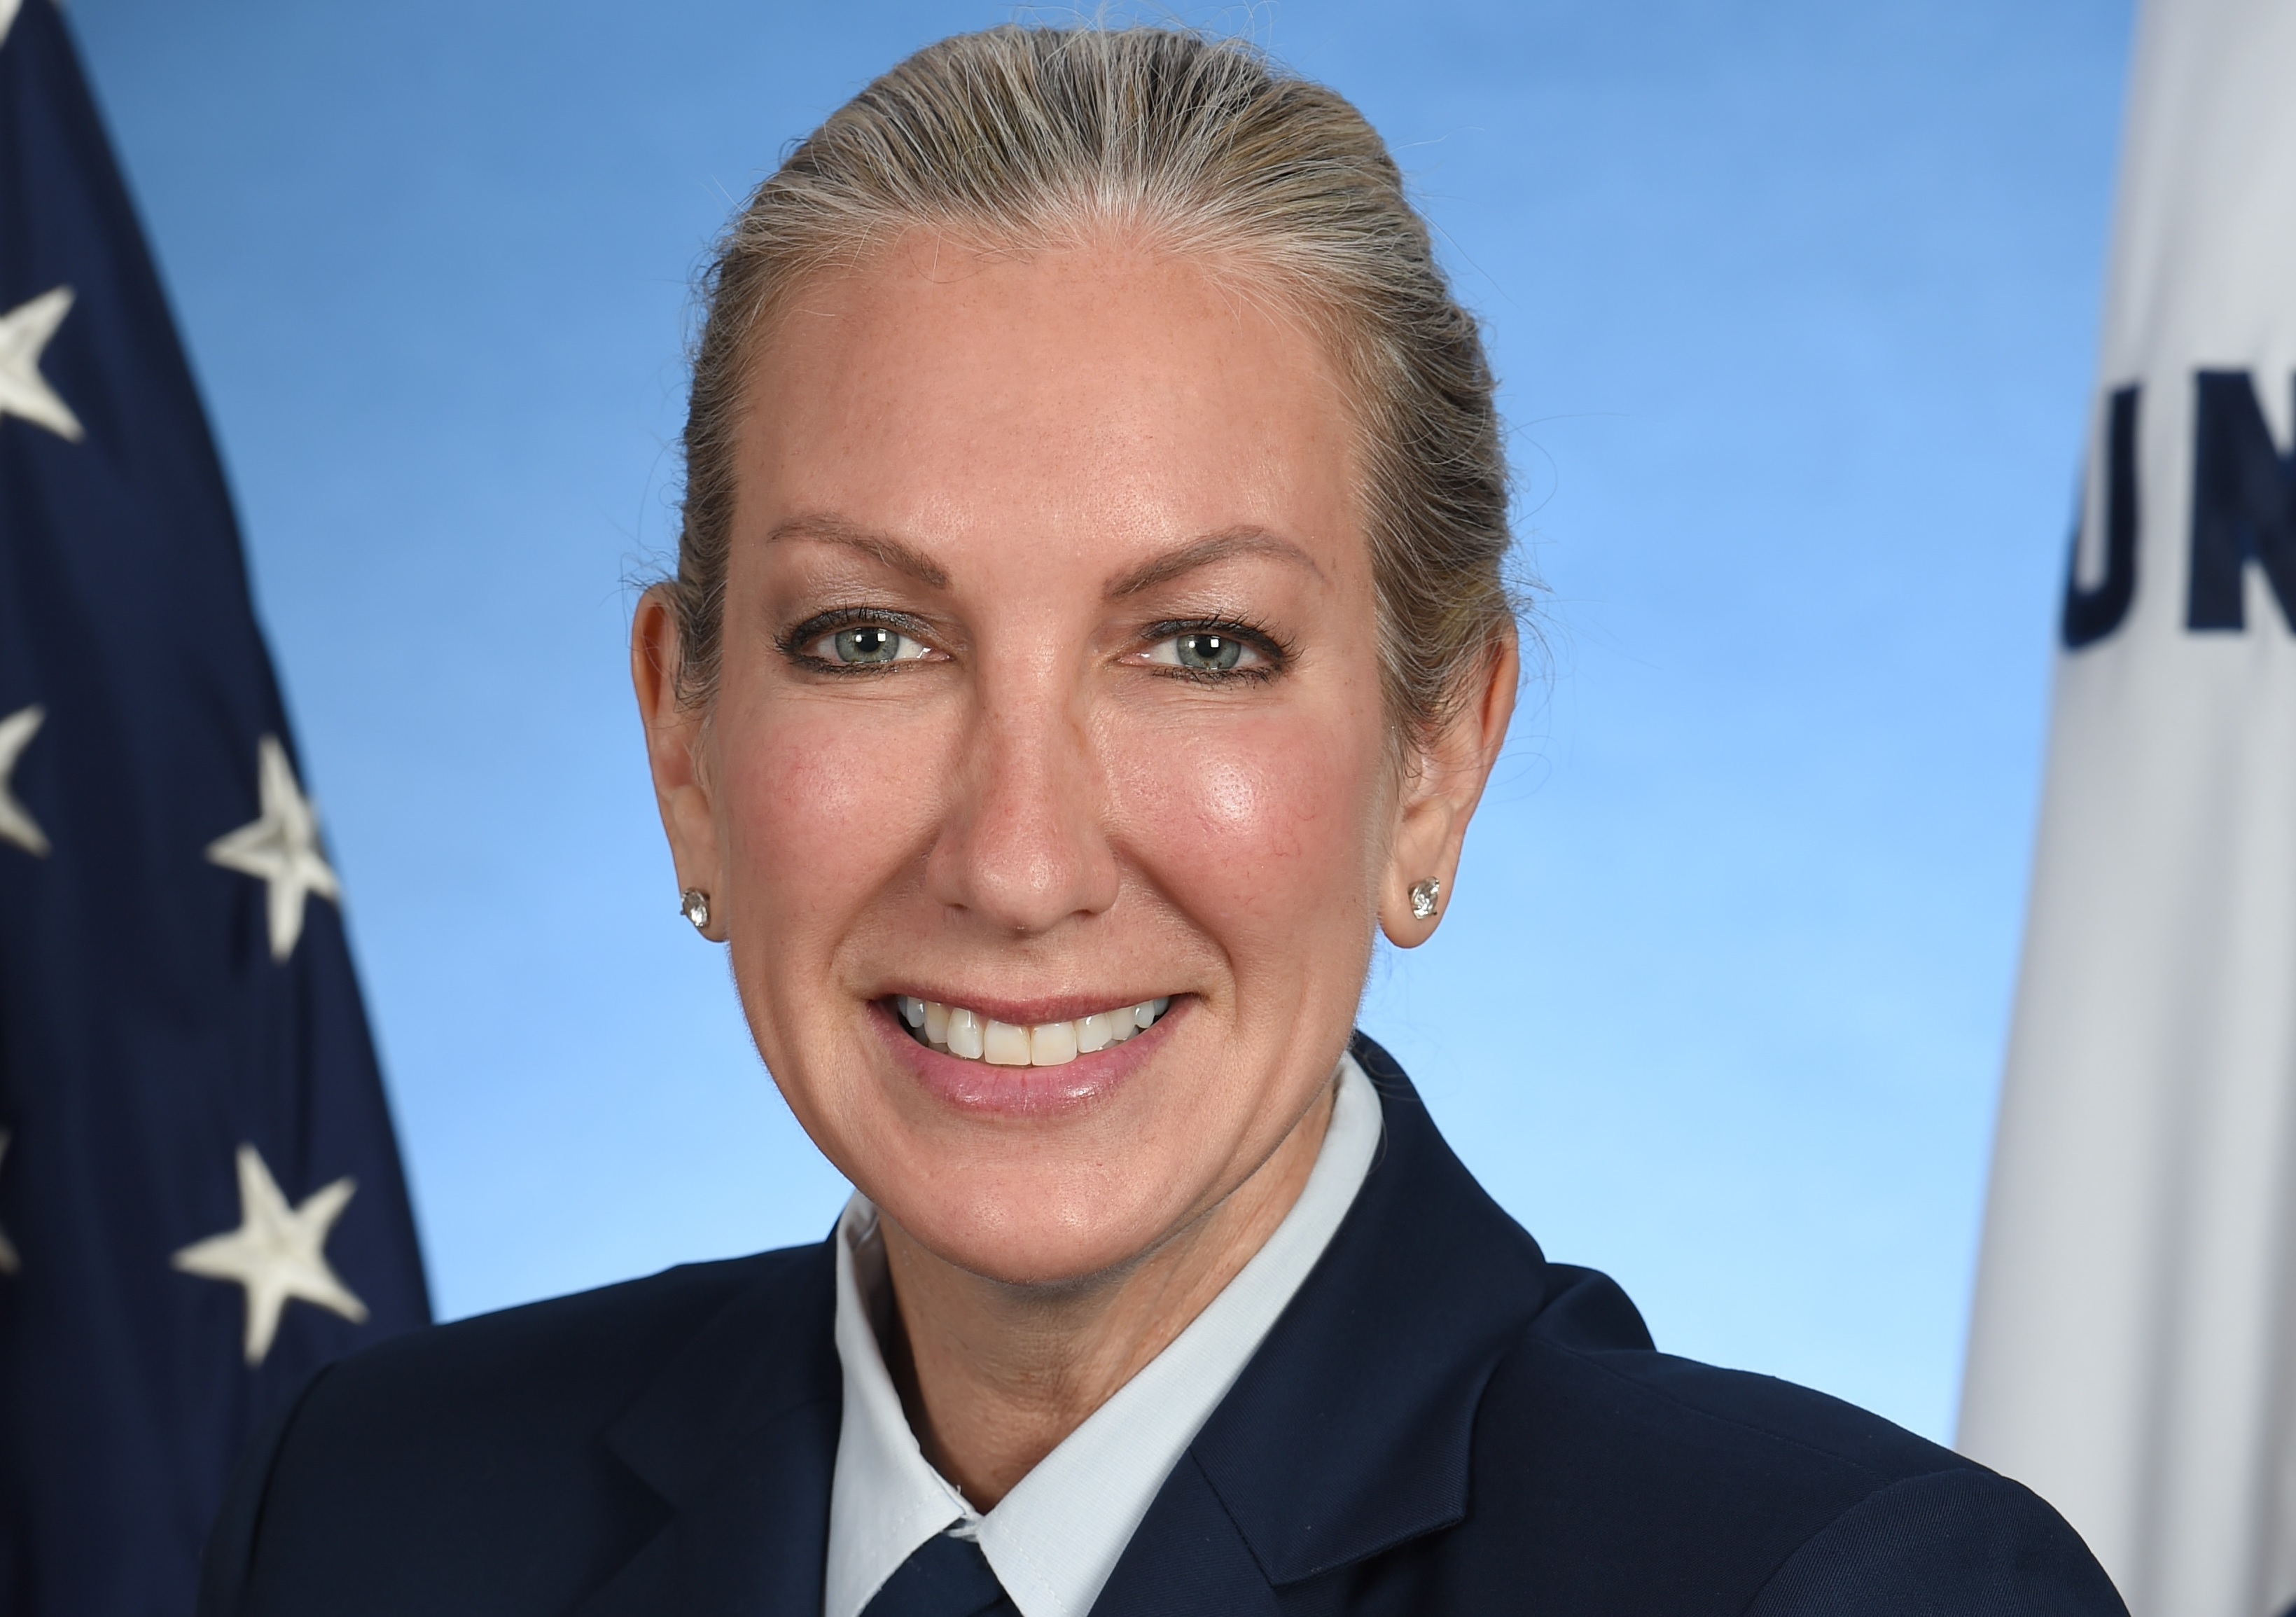 Portrait of a smiling woman in a military uniform, flanked by the flags of the United States and the Coast Guard.